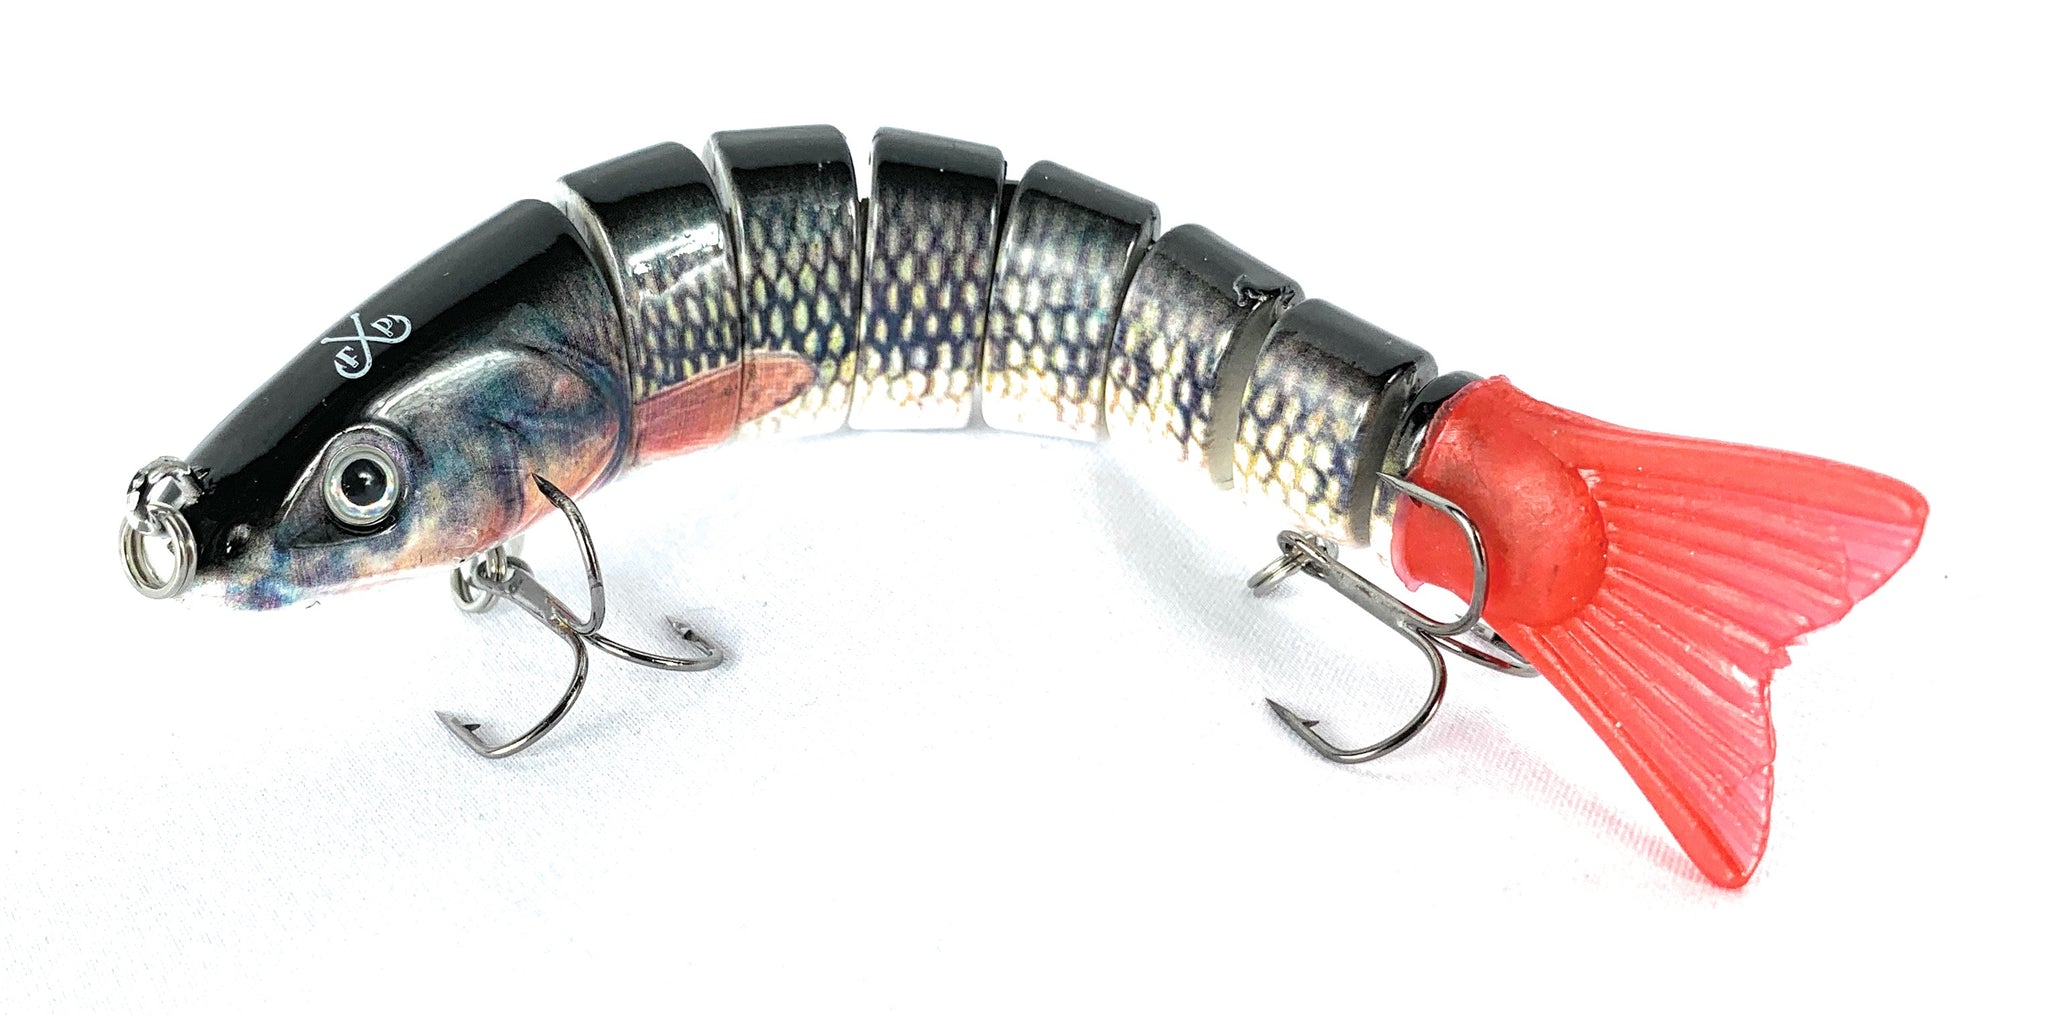 Swim Bait 5.5 Trout 8 Segments Authentic NICKY crank bait, fishing lure,  tough tackle, father pike, pike fishing – Father Pike